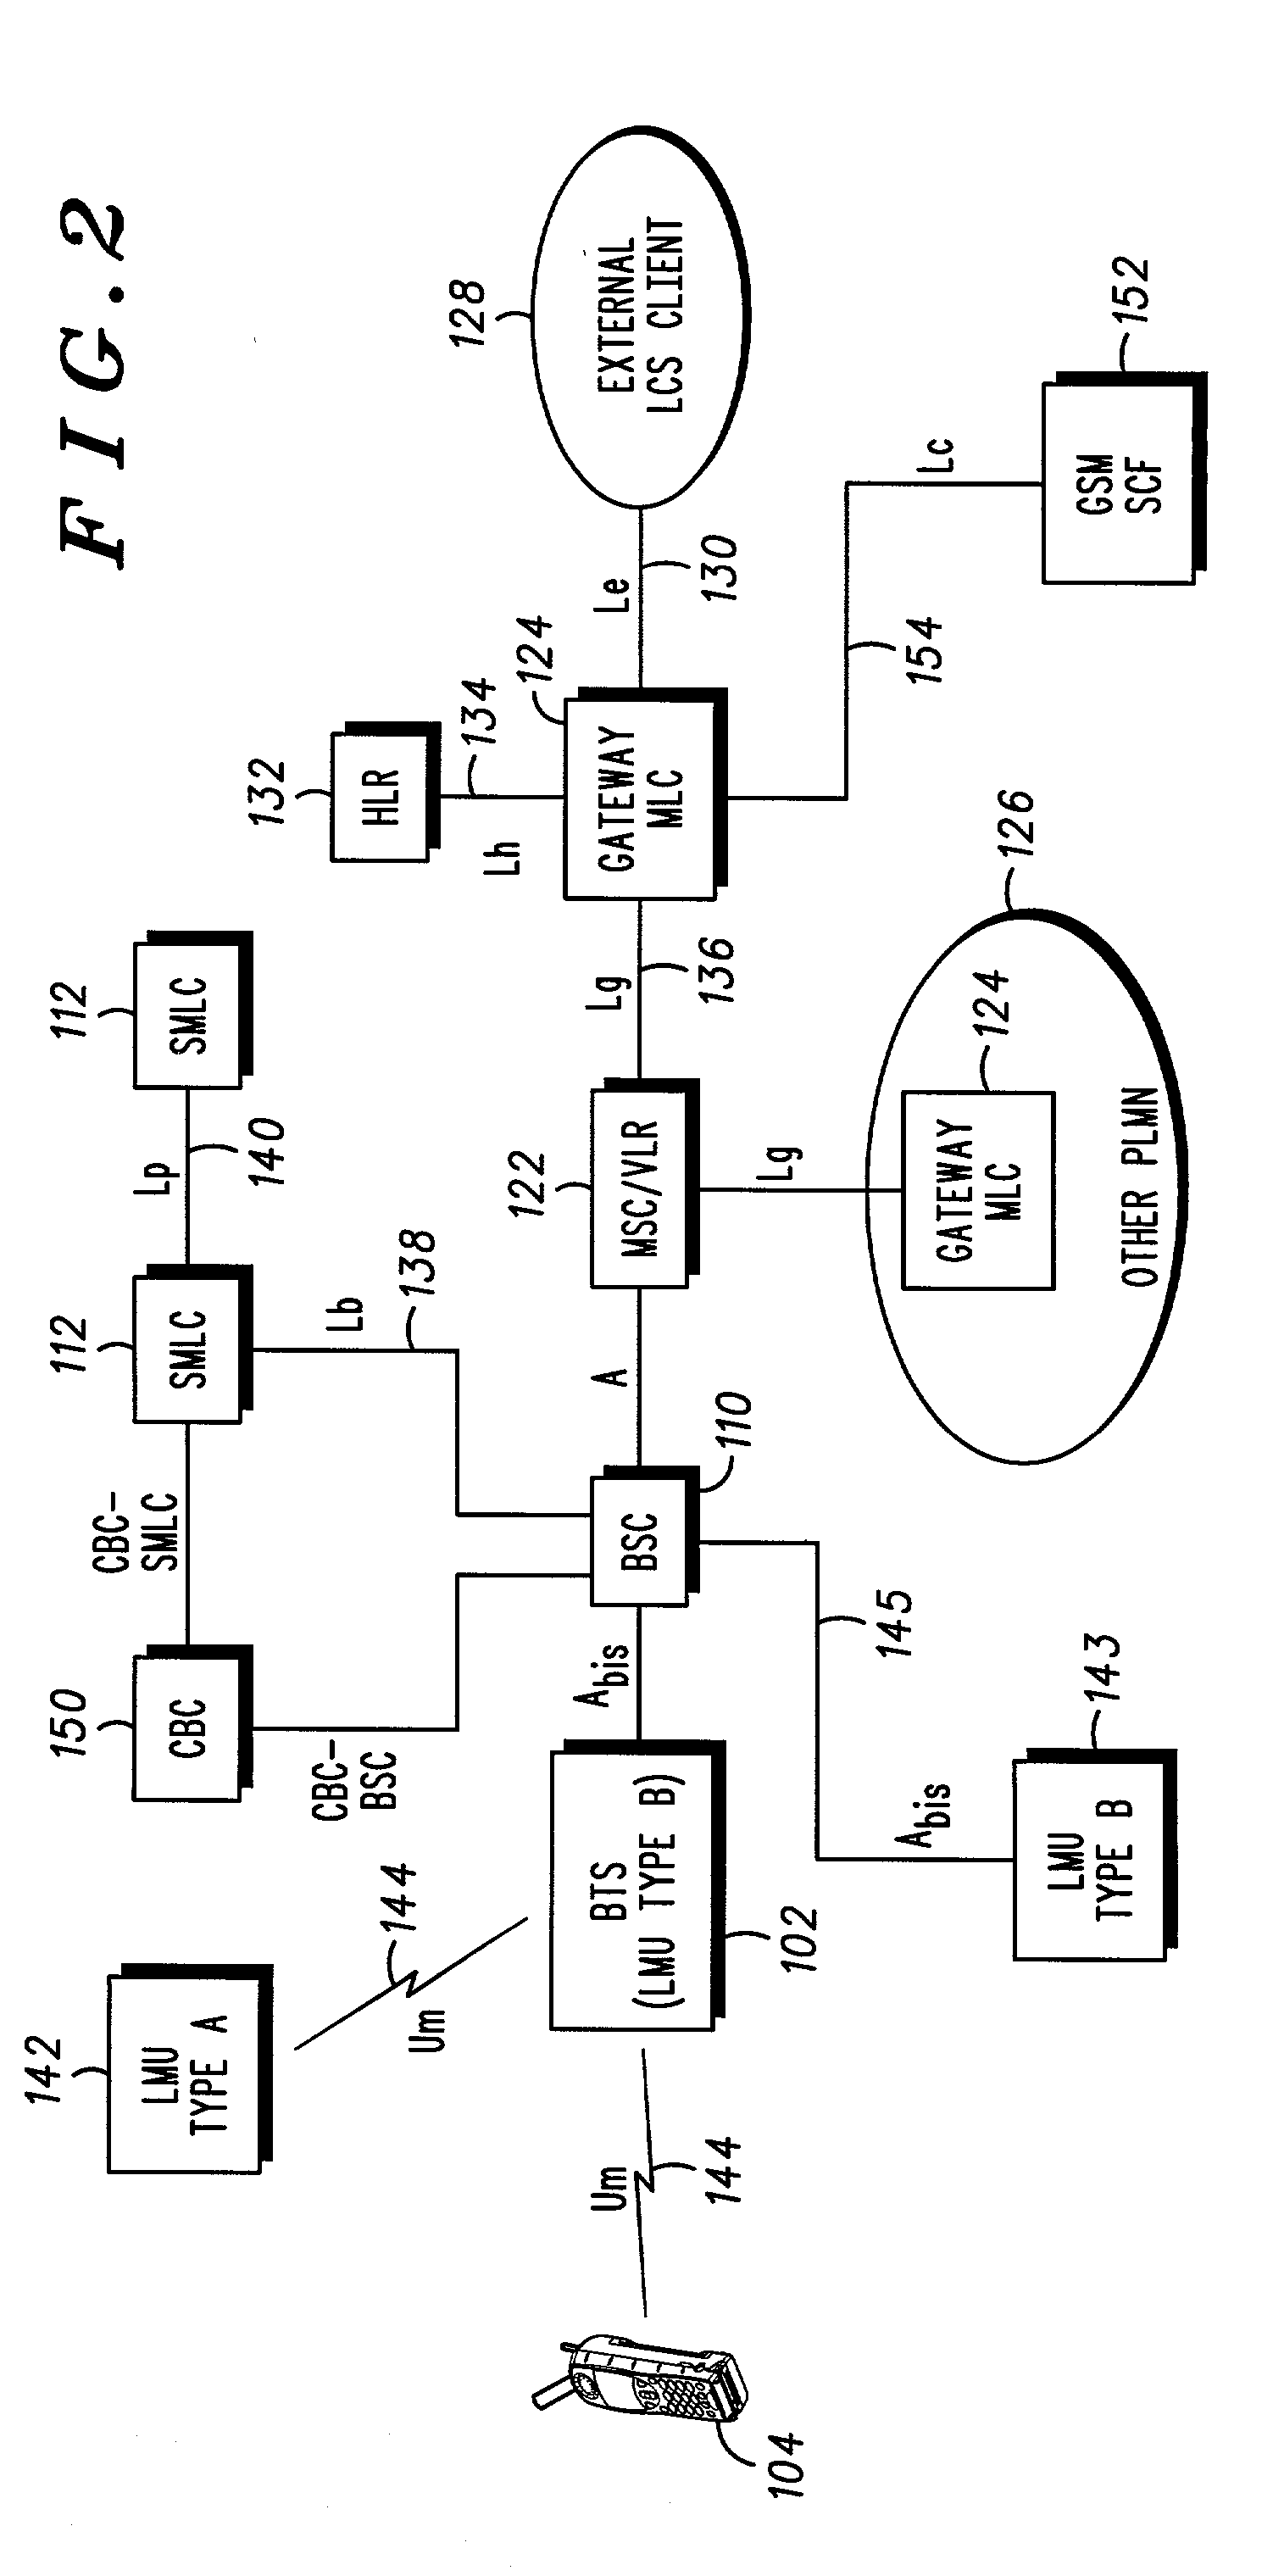 Method and apparatus for assisted GPS